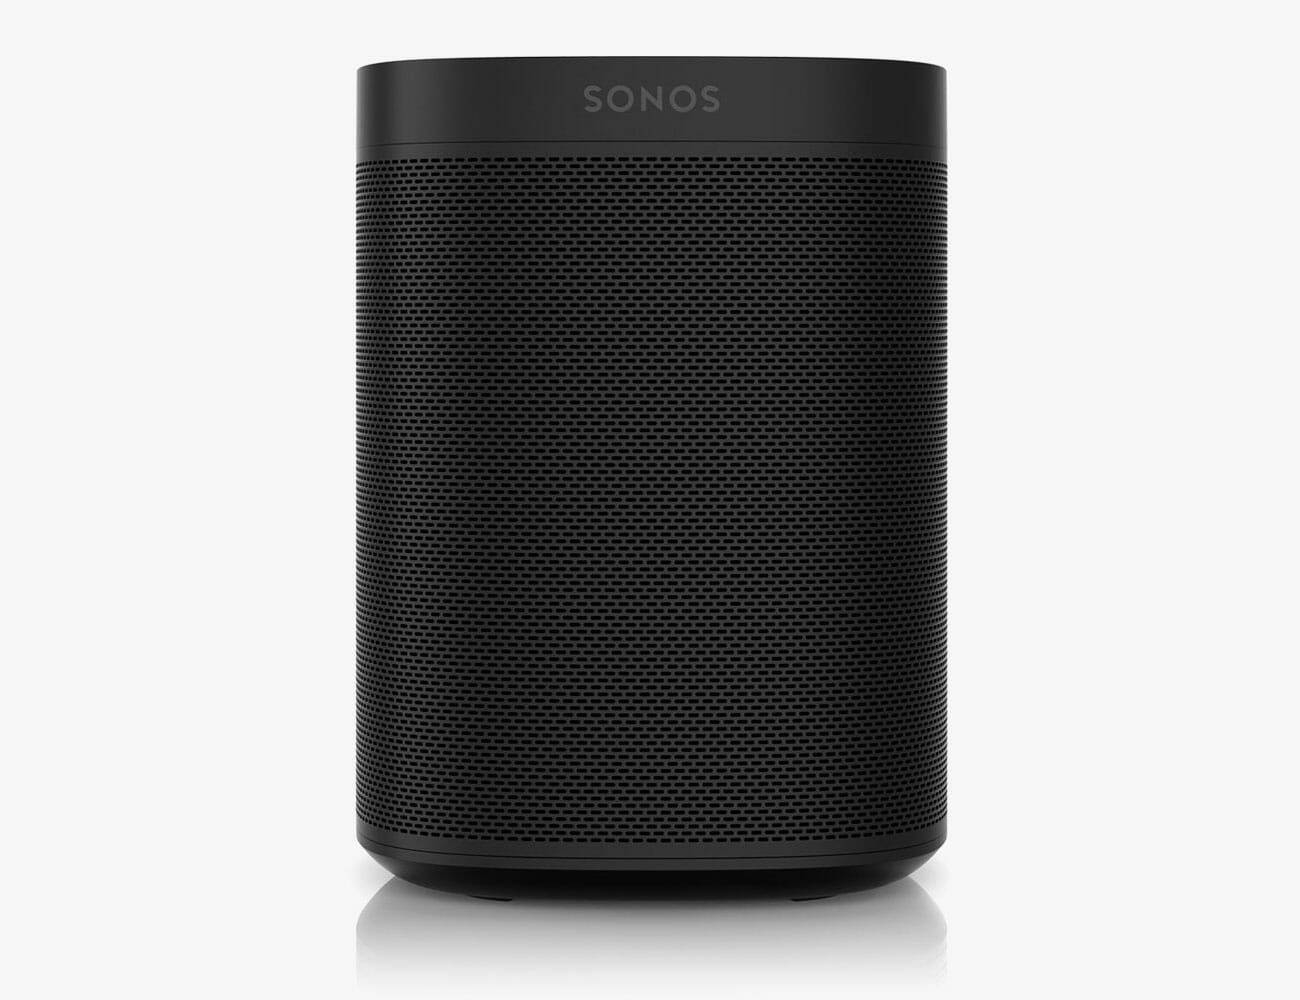 muis of rat tint Elektronisch The Complete Sonos Buying Guide: Every Speaker, Soundbar and Amp Explained